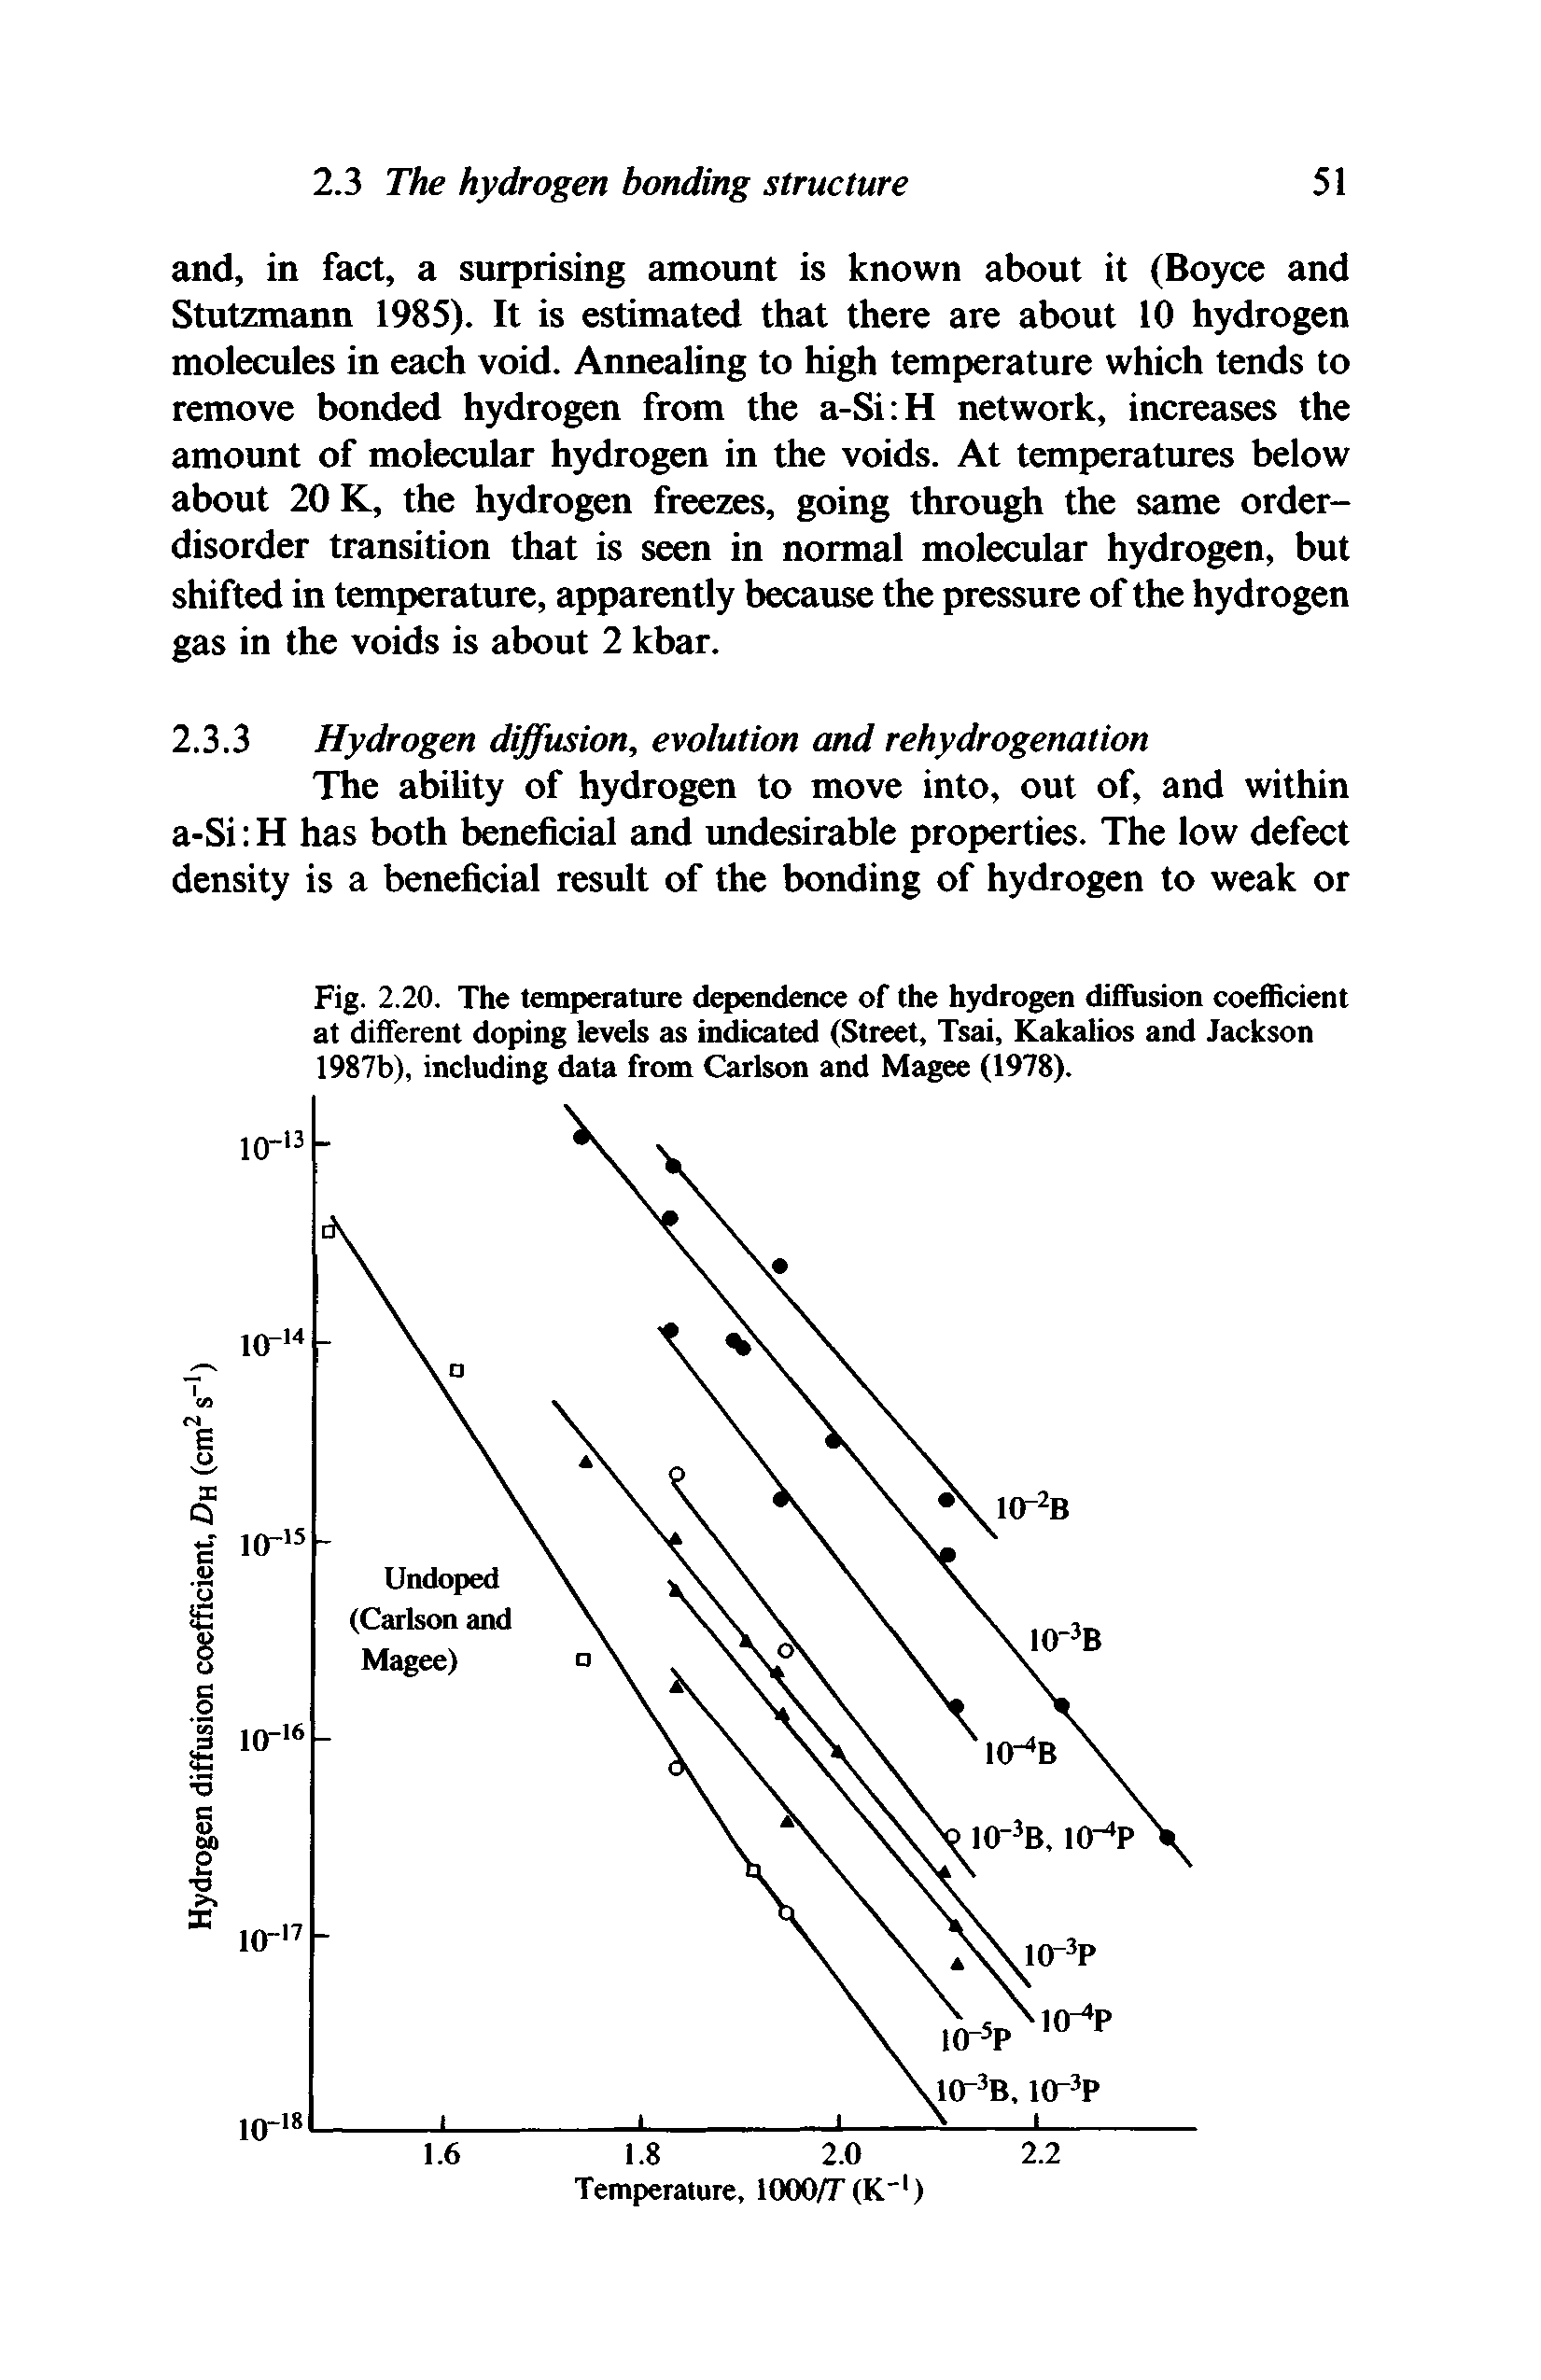 Fig. 2.20. The temperature dependence of the hydrogen diffusion coefficient at different doping levels as indicated (Street, Tsai, Kakalios and Jackson 1987b), including data from Carlson and Magee (1978).